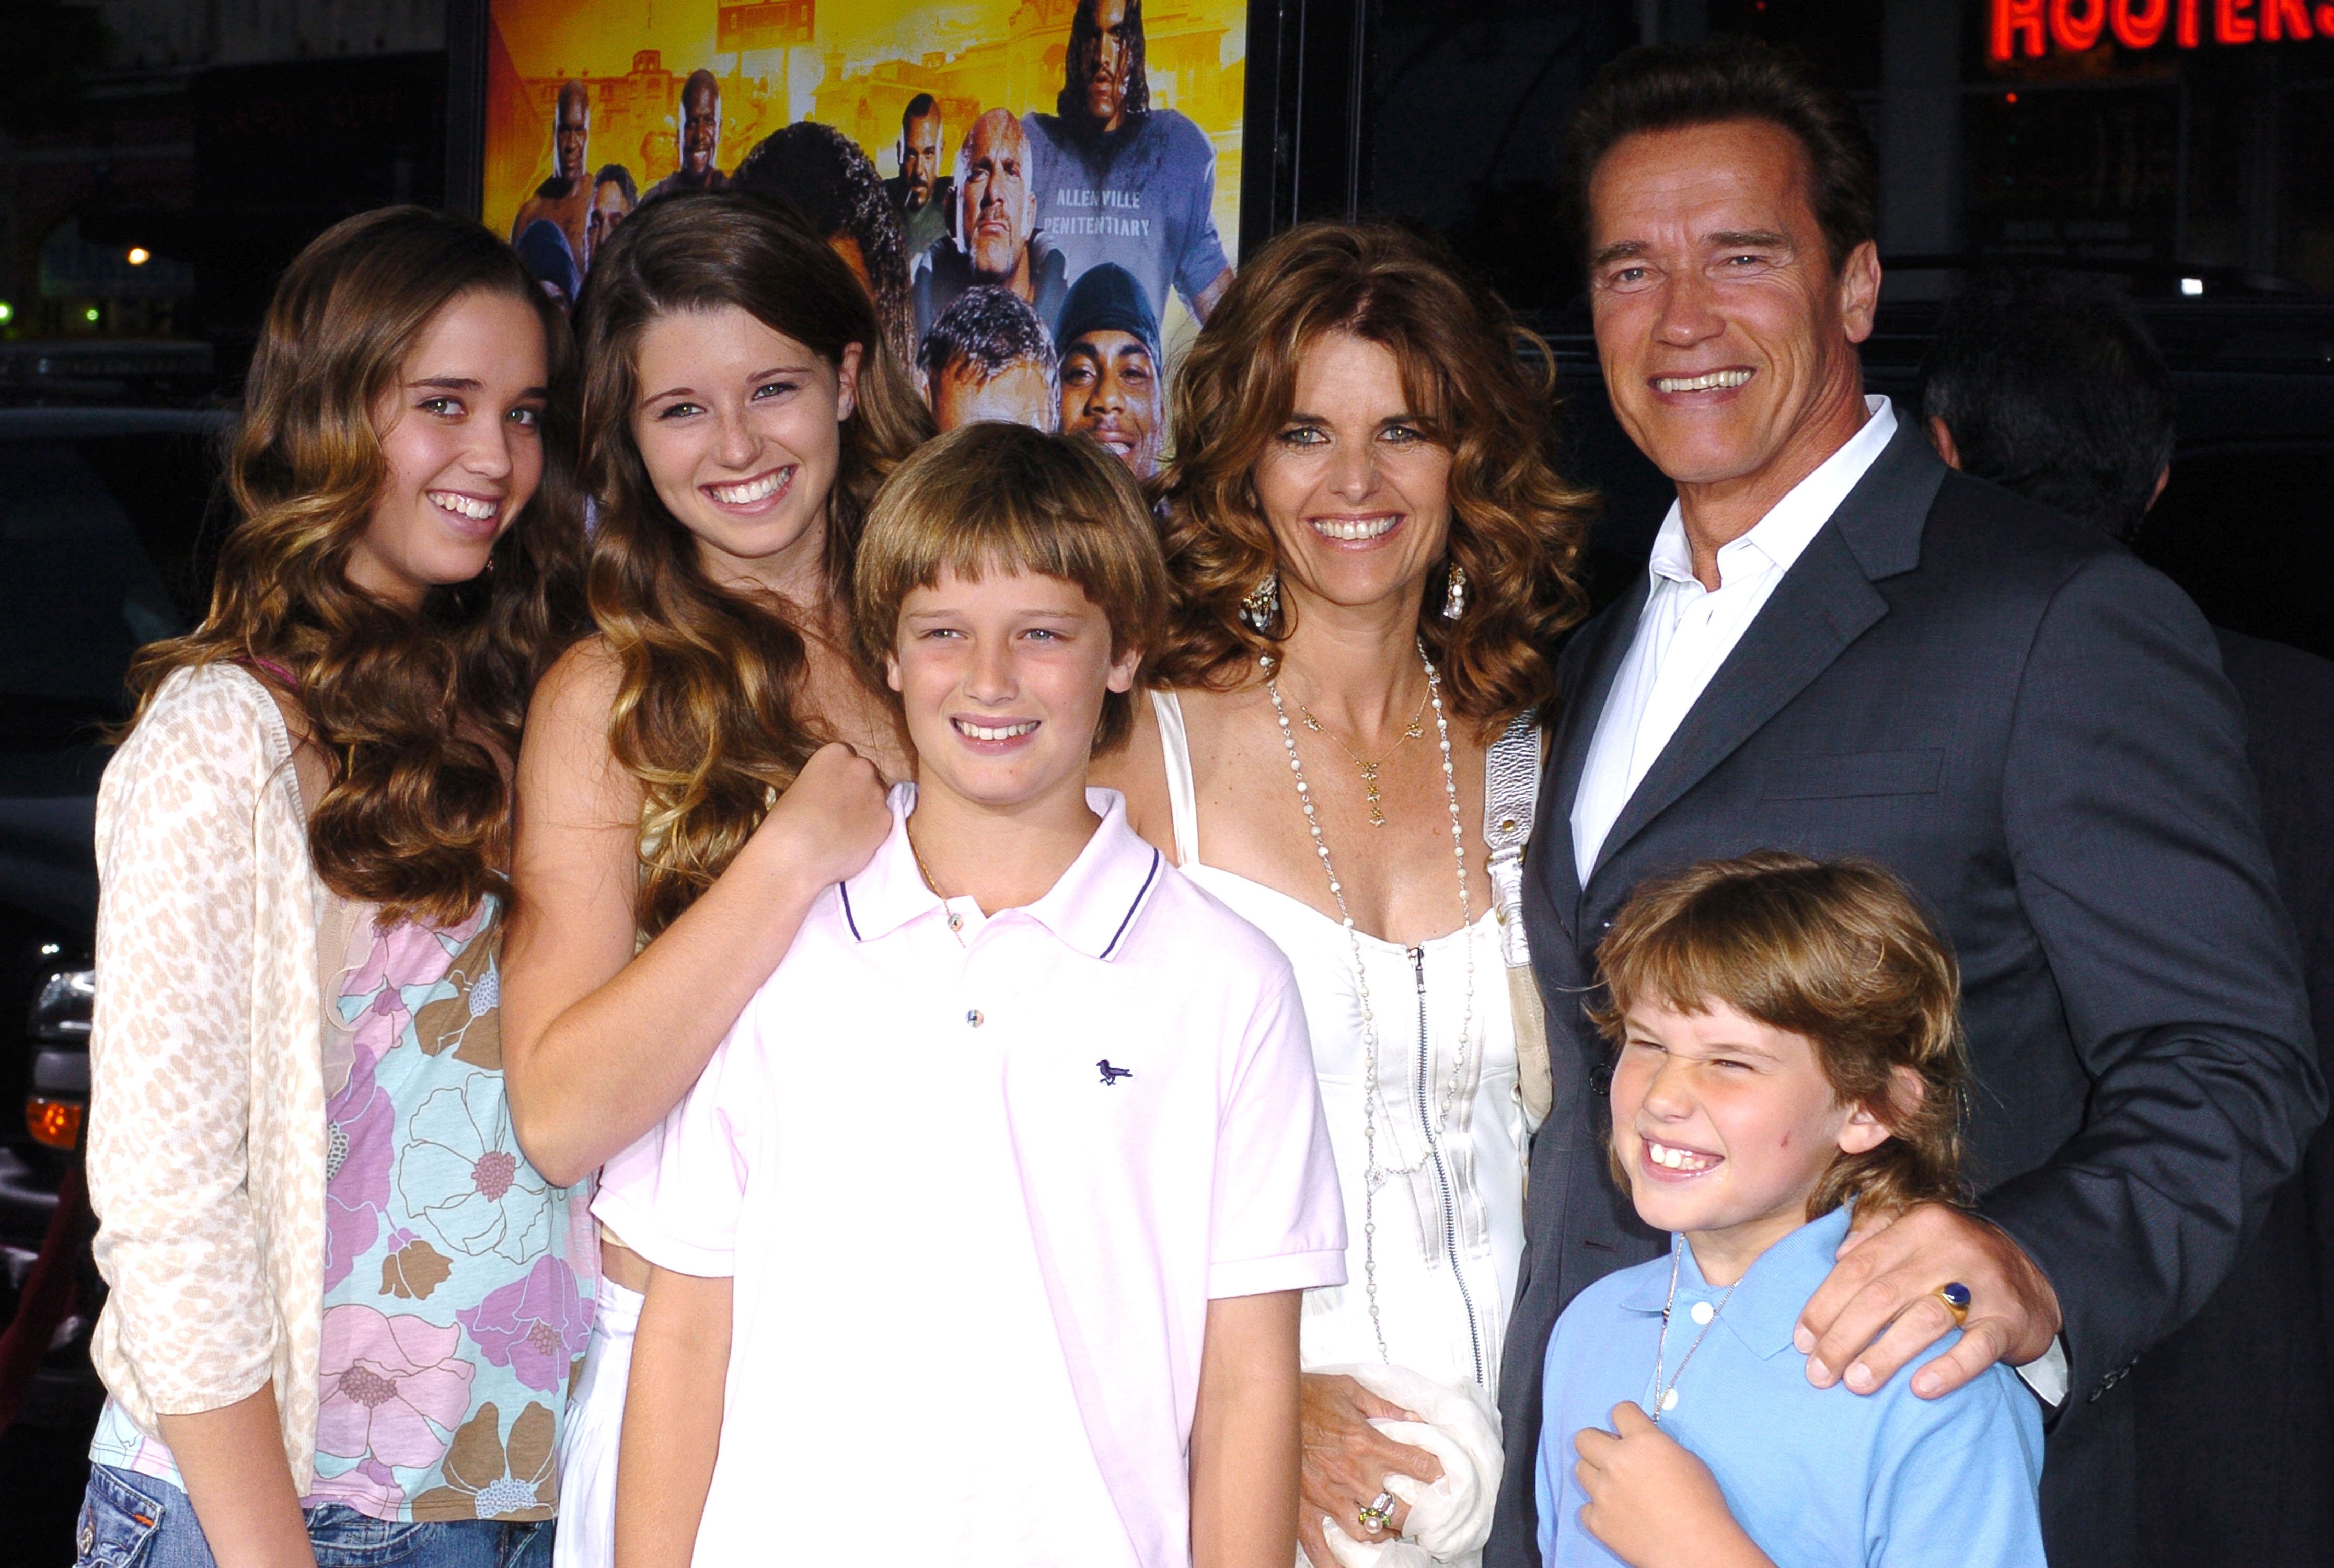 Arnold Schwarzenegger, Maria Shriver, and Family during "The Longest Yard" Los Angeles Premiere - Arrivals at Grauman's Chinese Theatre in Hollywood, California, United States. | Source: Getty Images